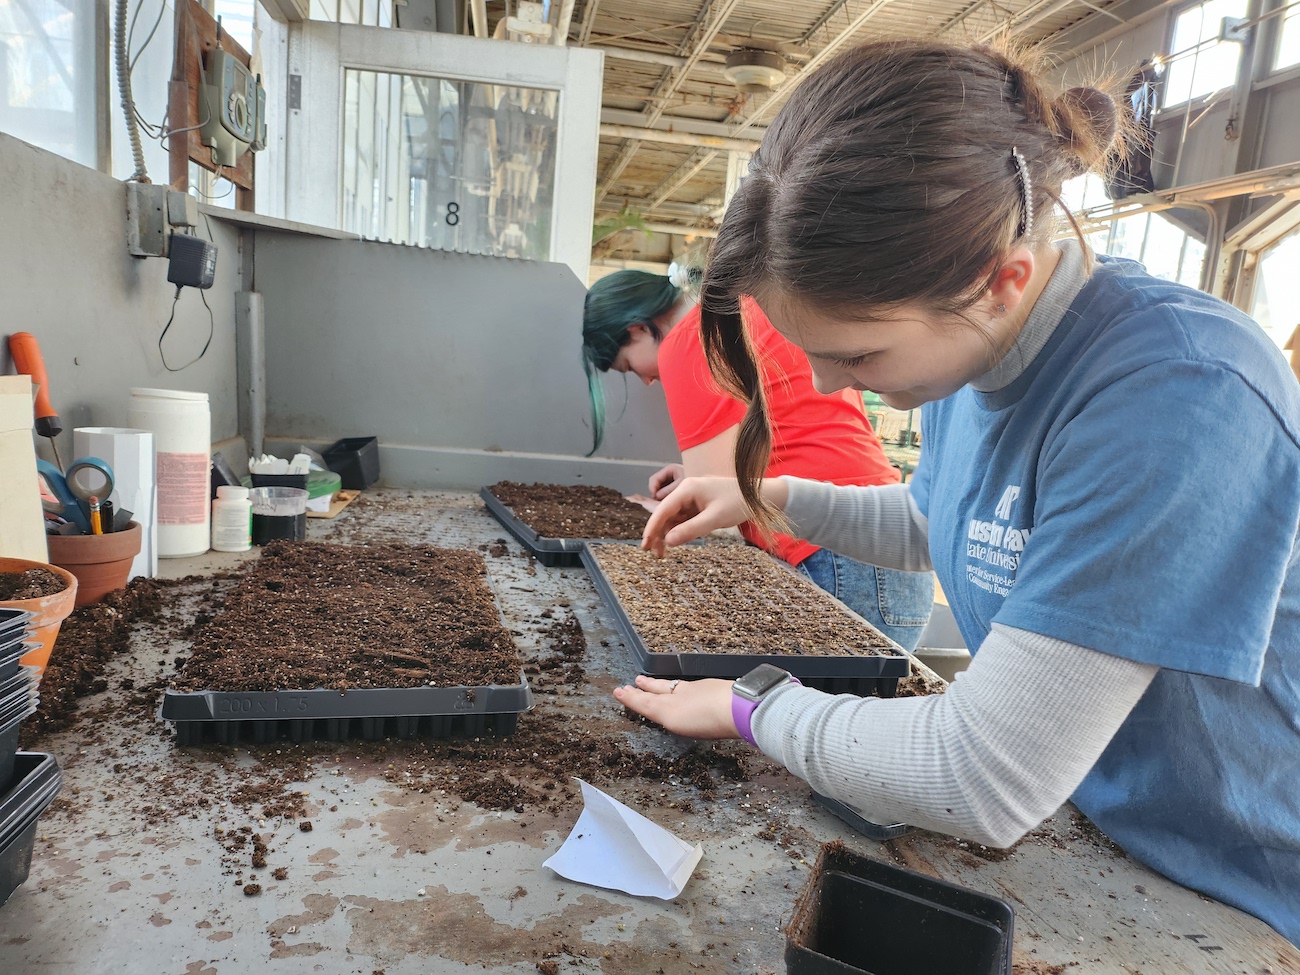 Photo: APSU students help plant over 5,000 seeds for an eventual fresh produce distribution during an Alternative Break trip to St. Louis, Missouri.